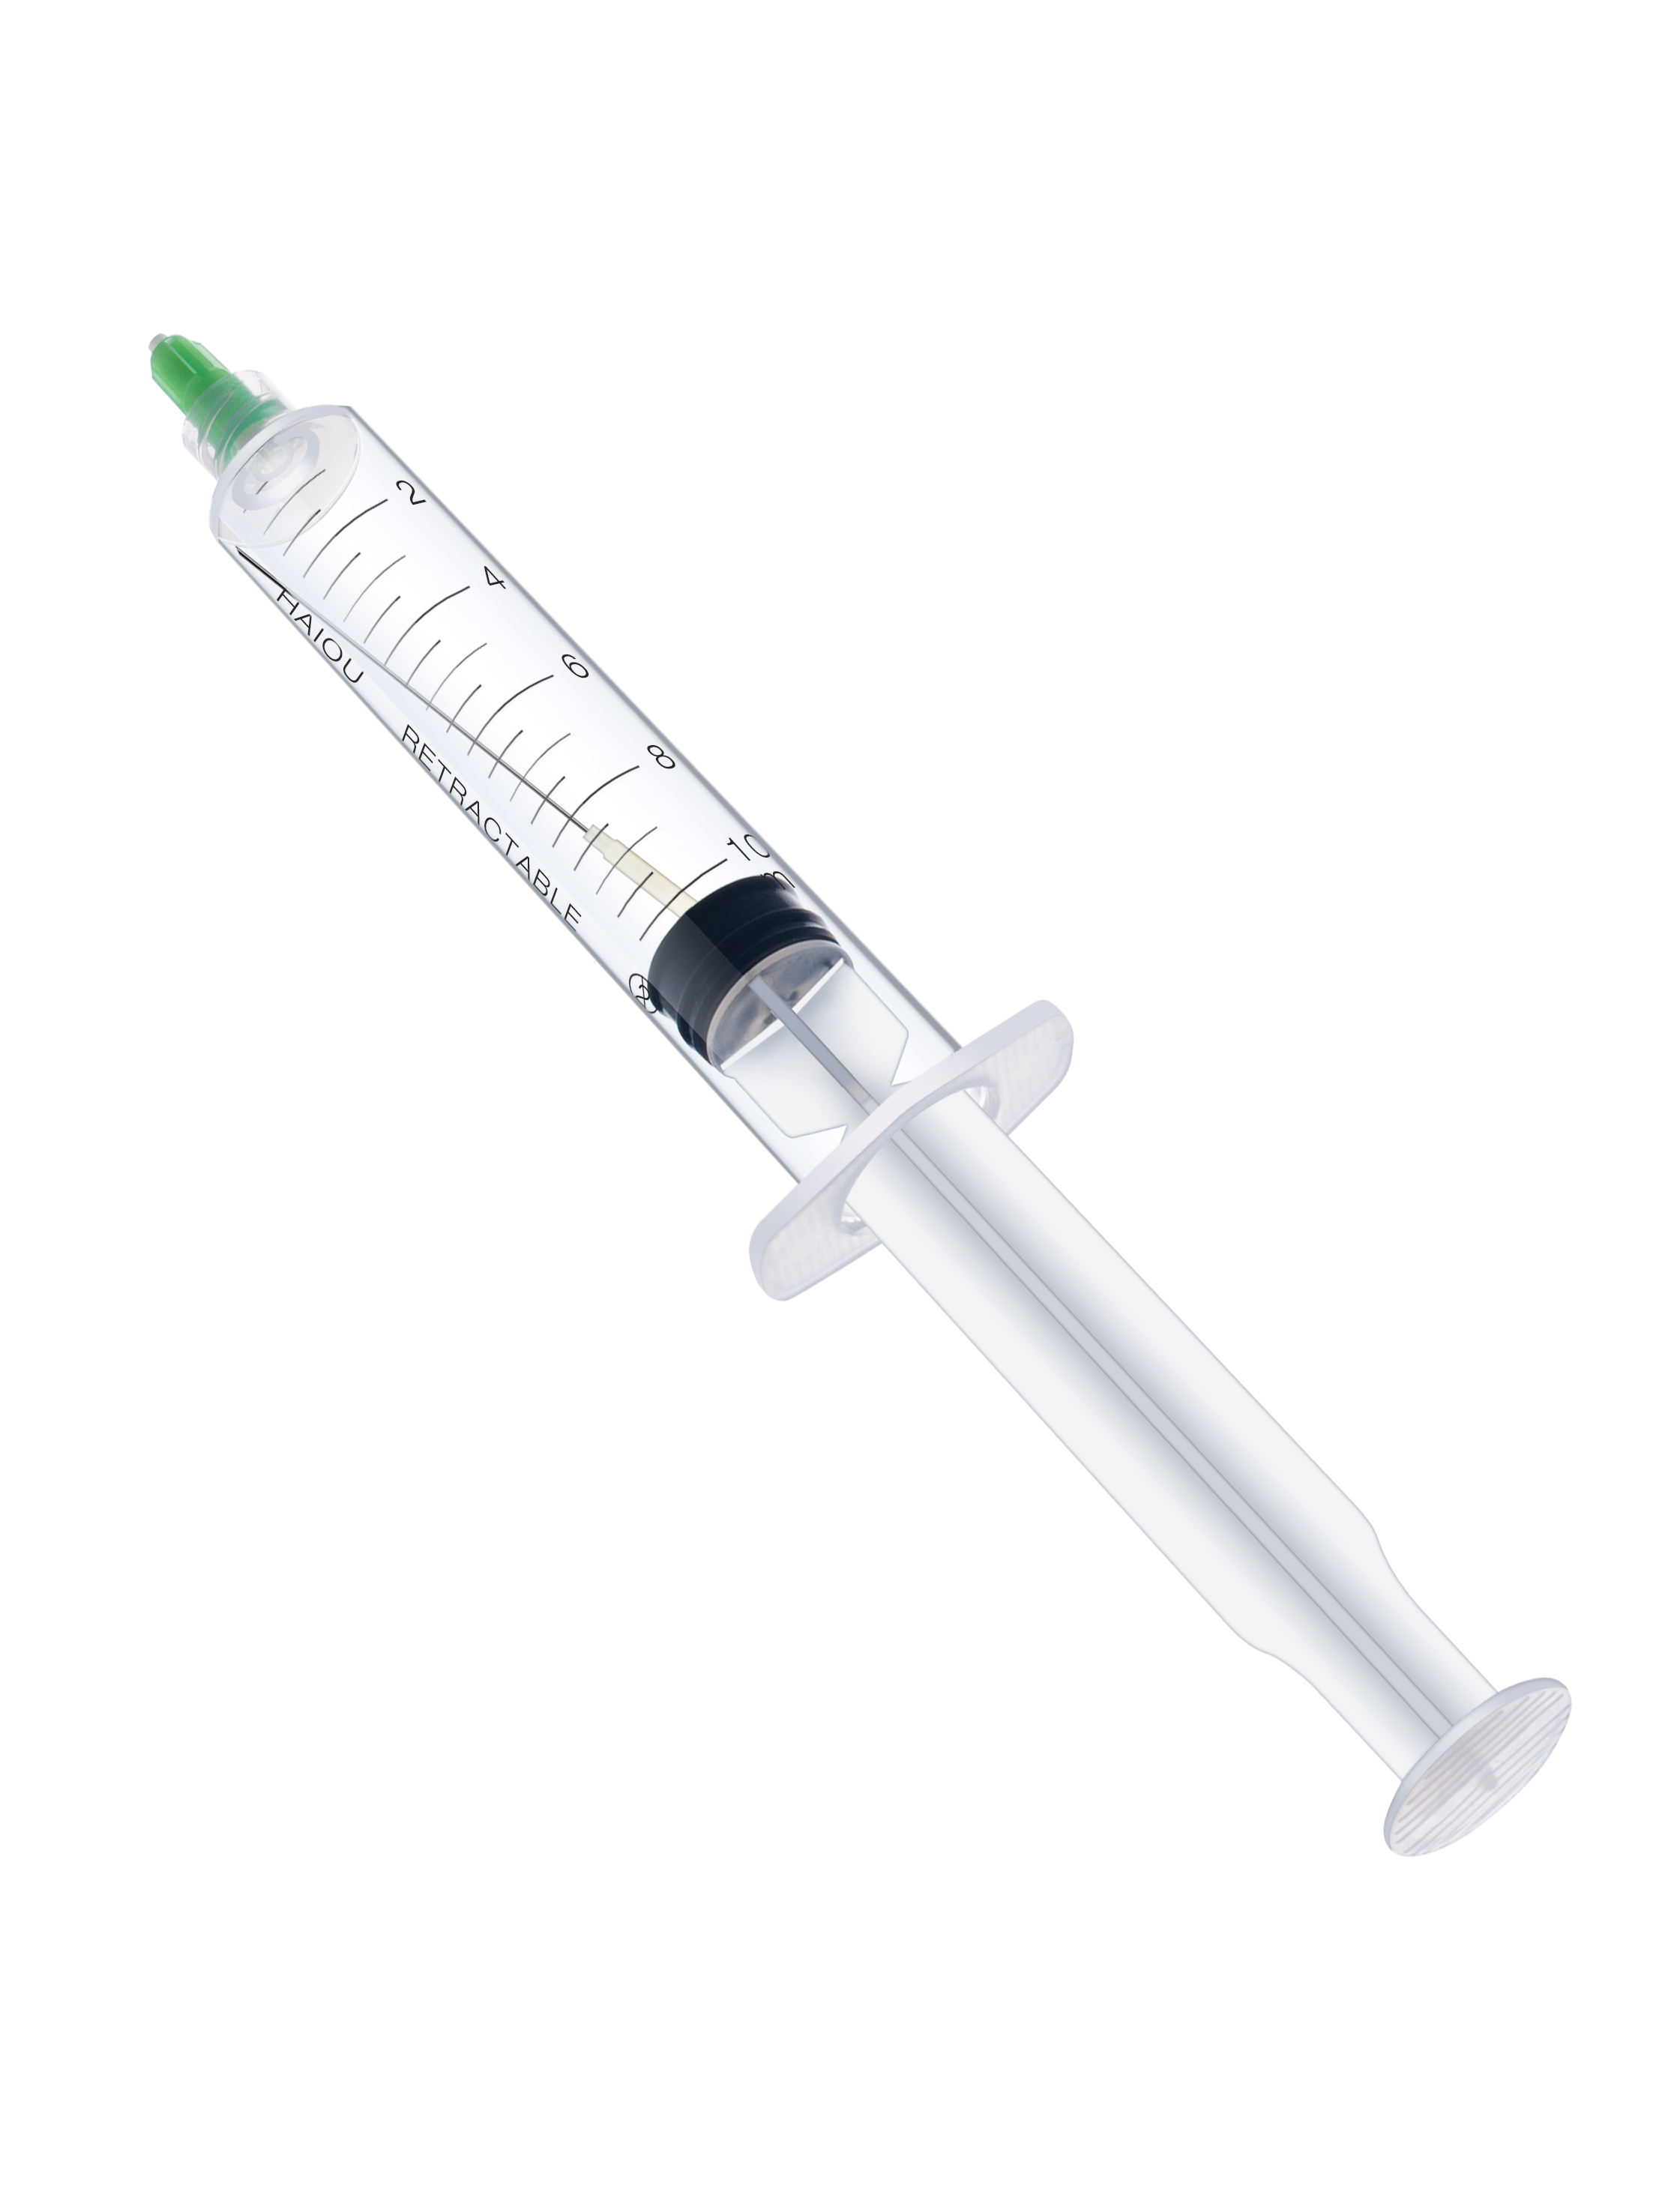 Auto-Retractable Safety Syringes with Needles